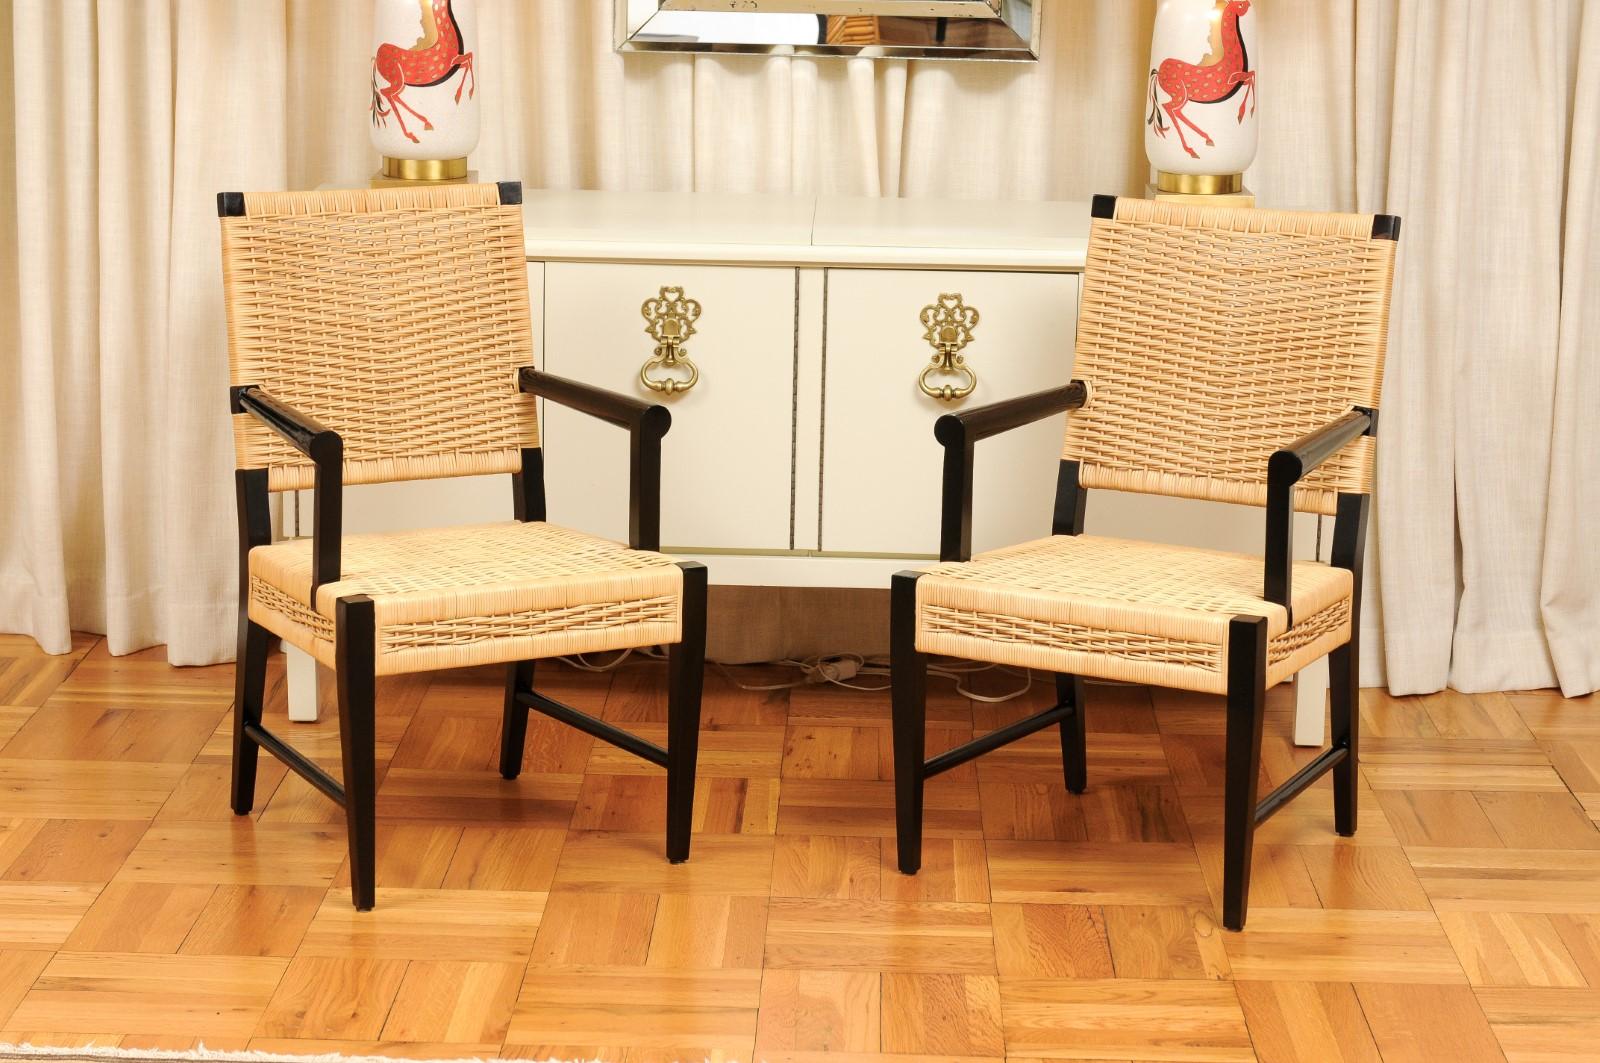 Remarkable Set of 12 Mahogany and Cane Arm Chairs by John Hutton for Donghia For Sale 8